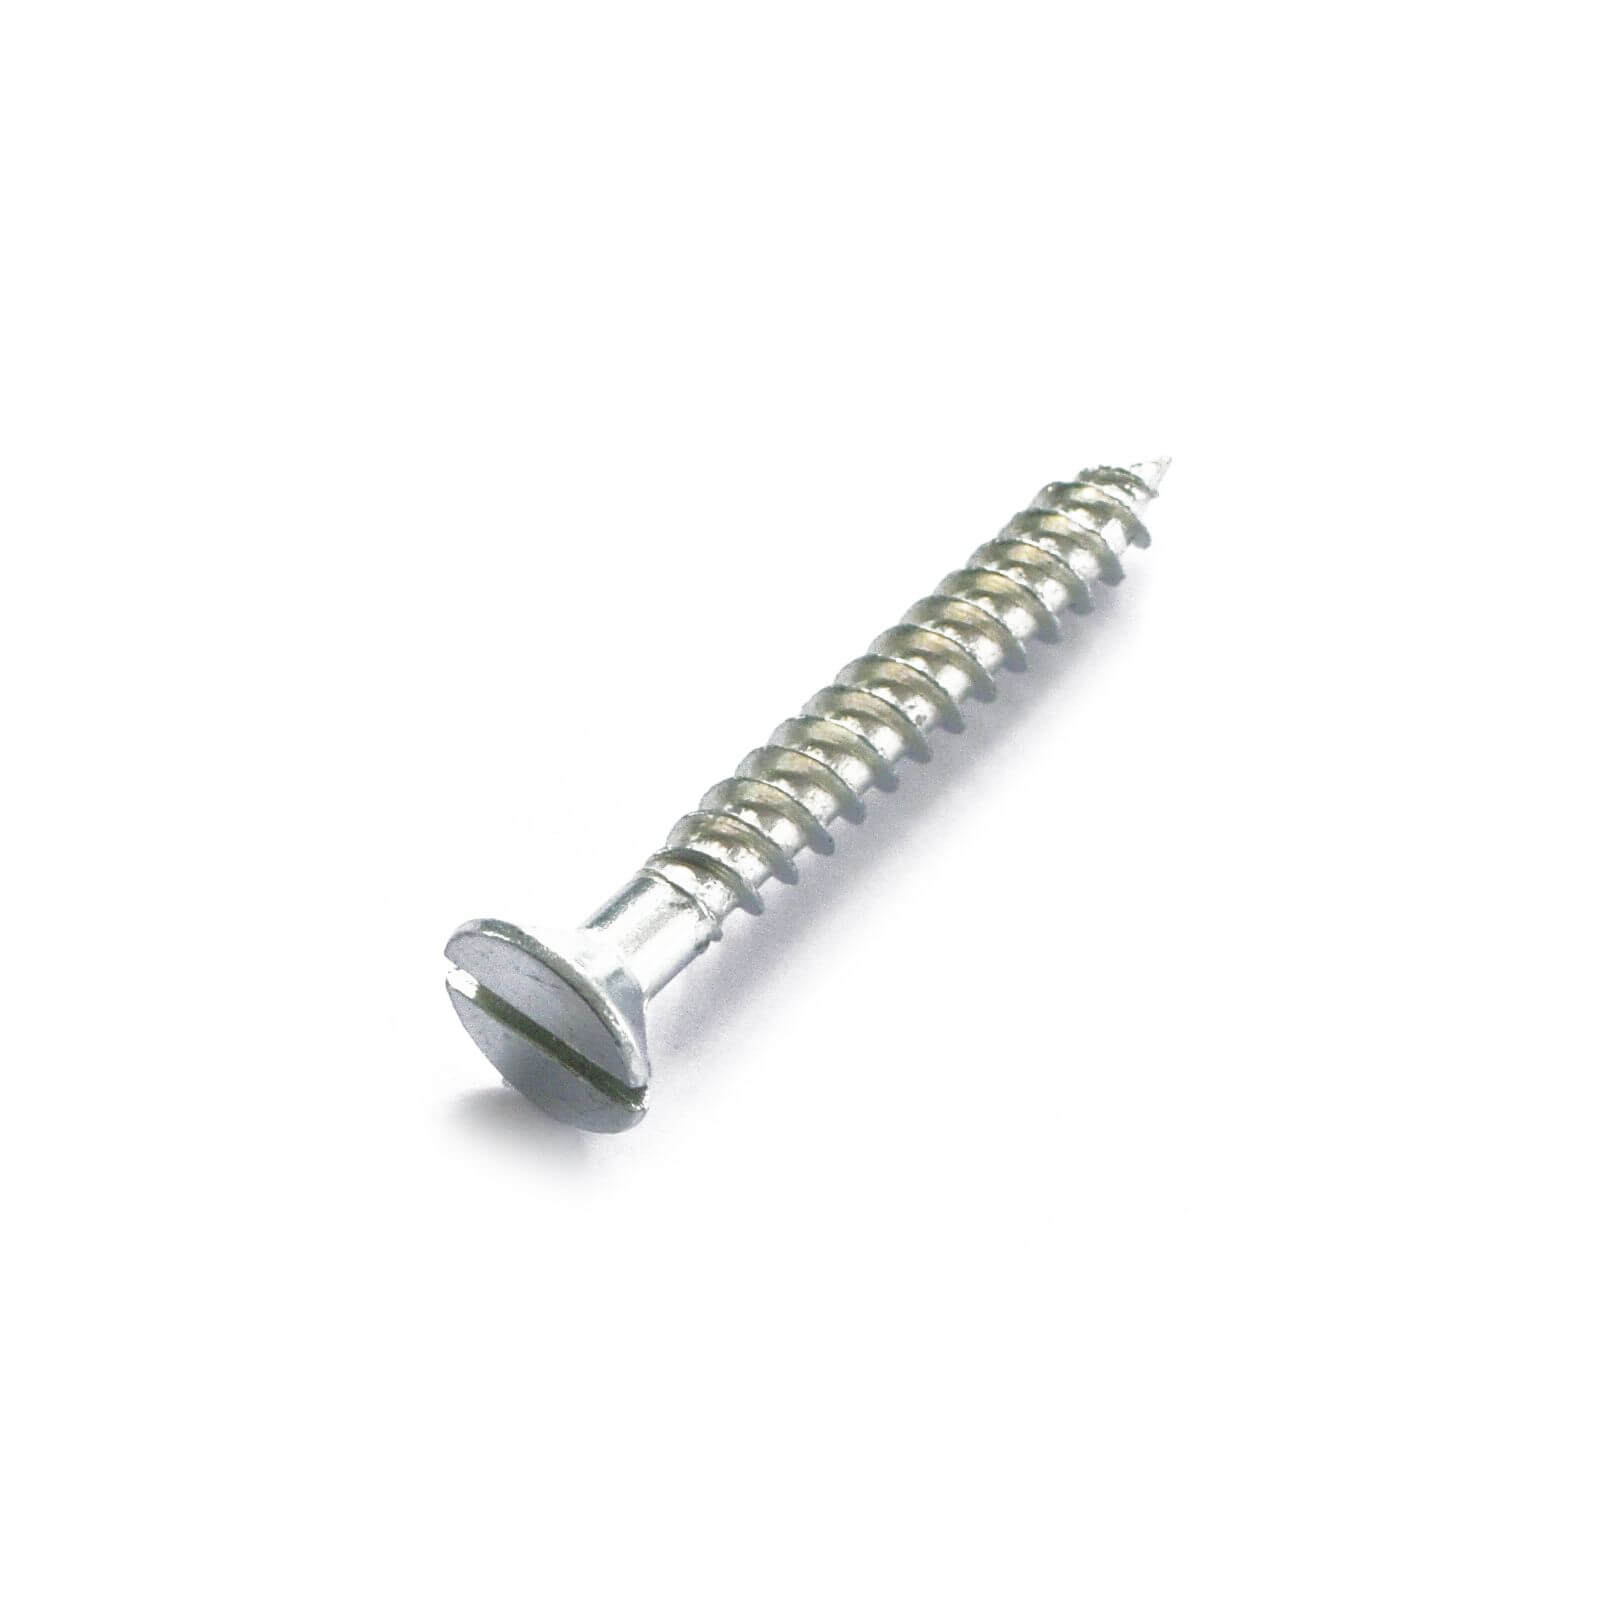 Wood Screw - Countersunk - Bright Zinc Plated - 5 x 75mm - 10 Pack